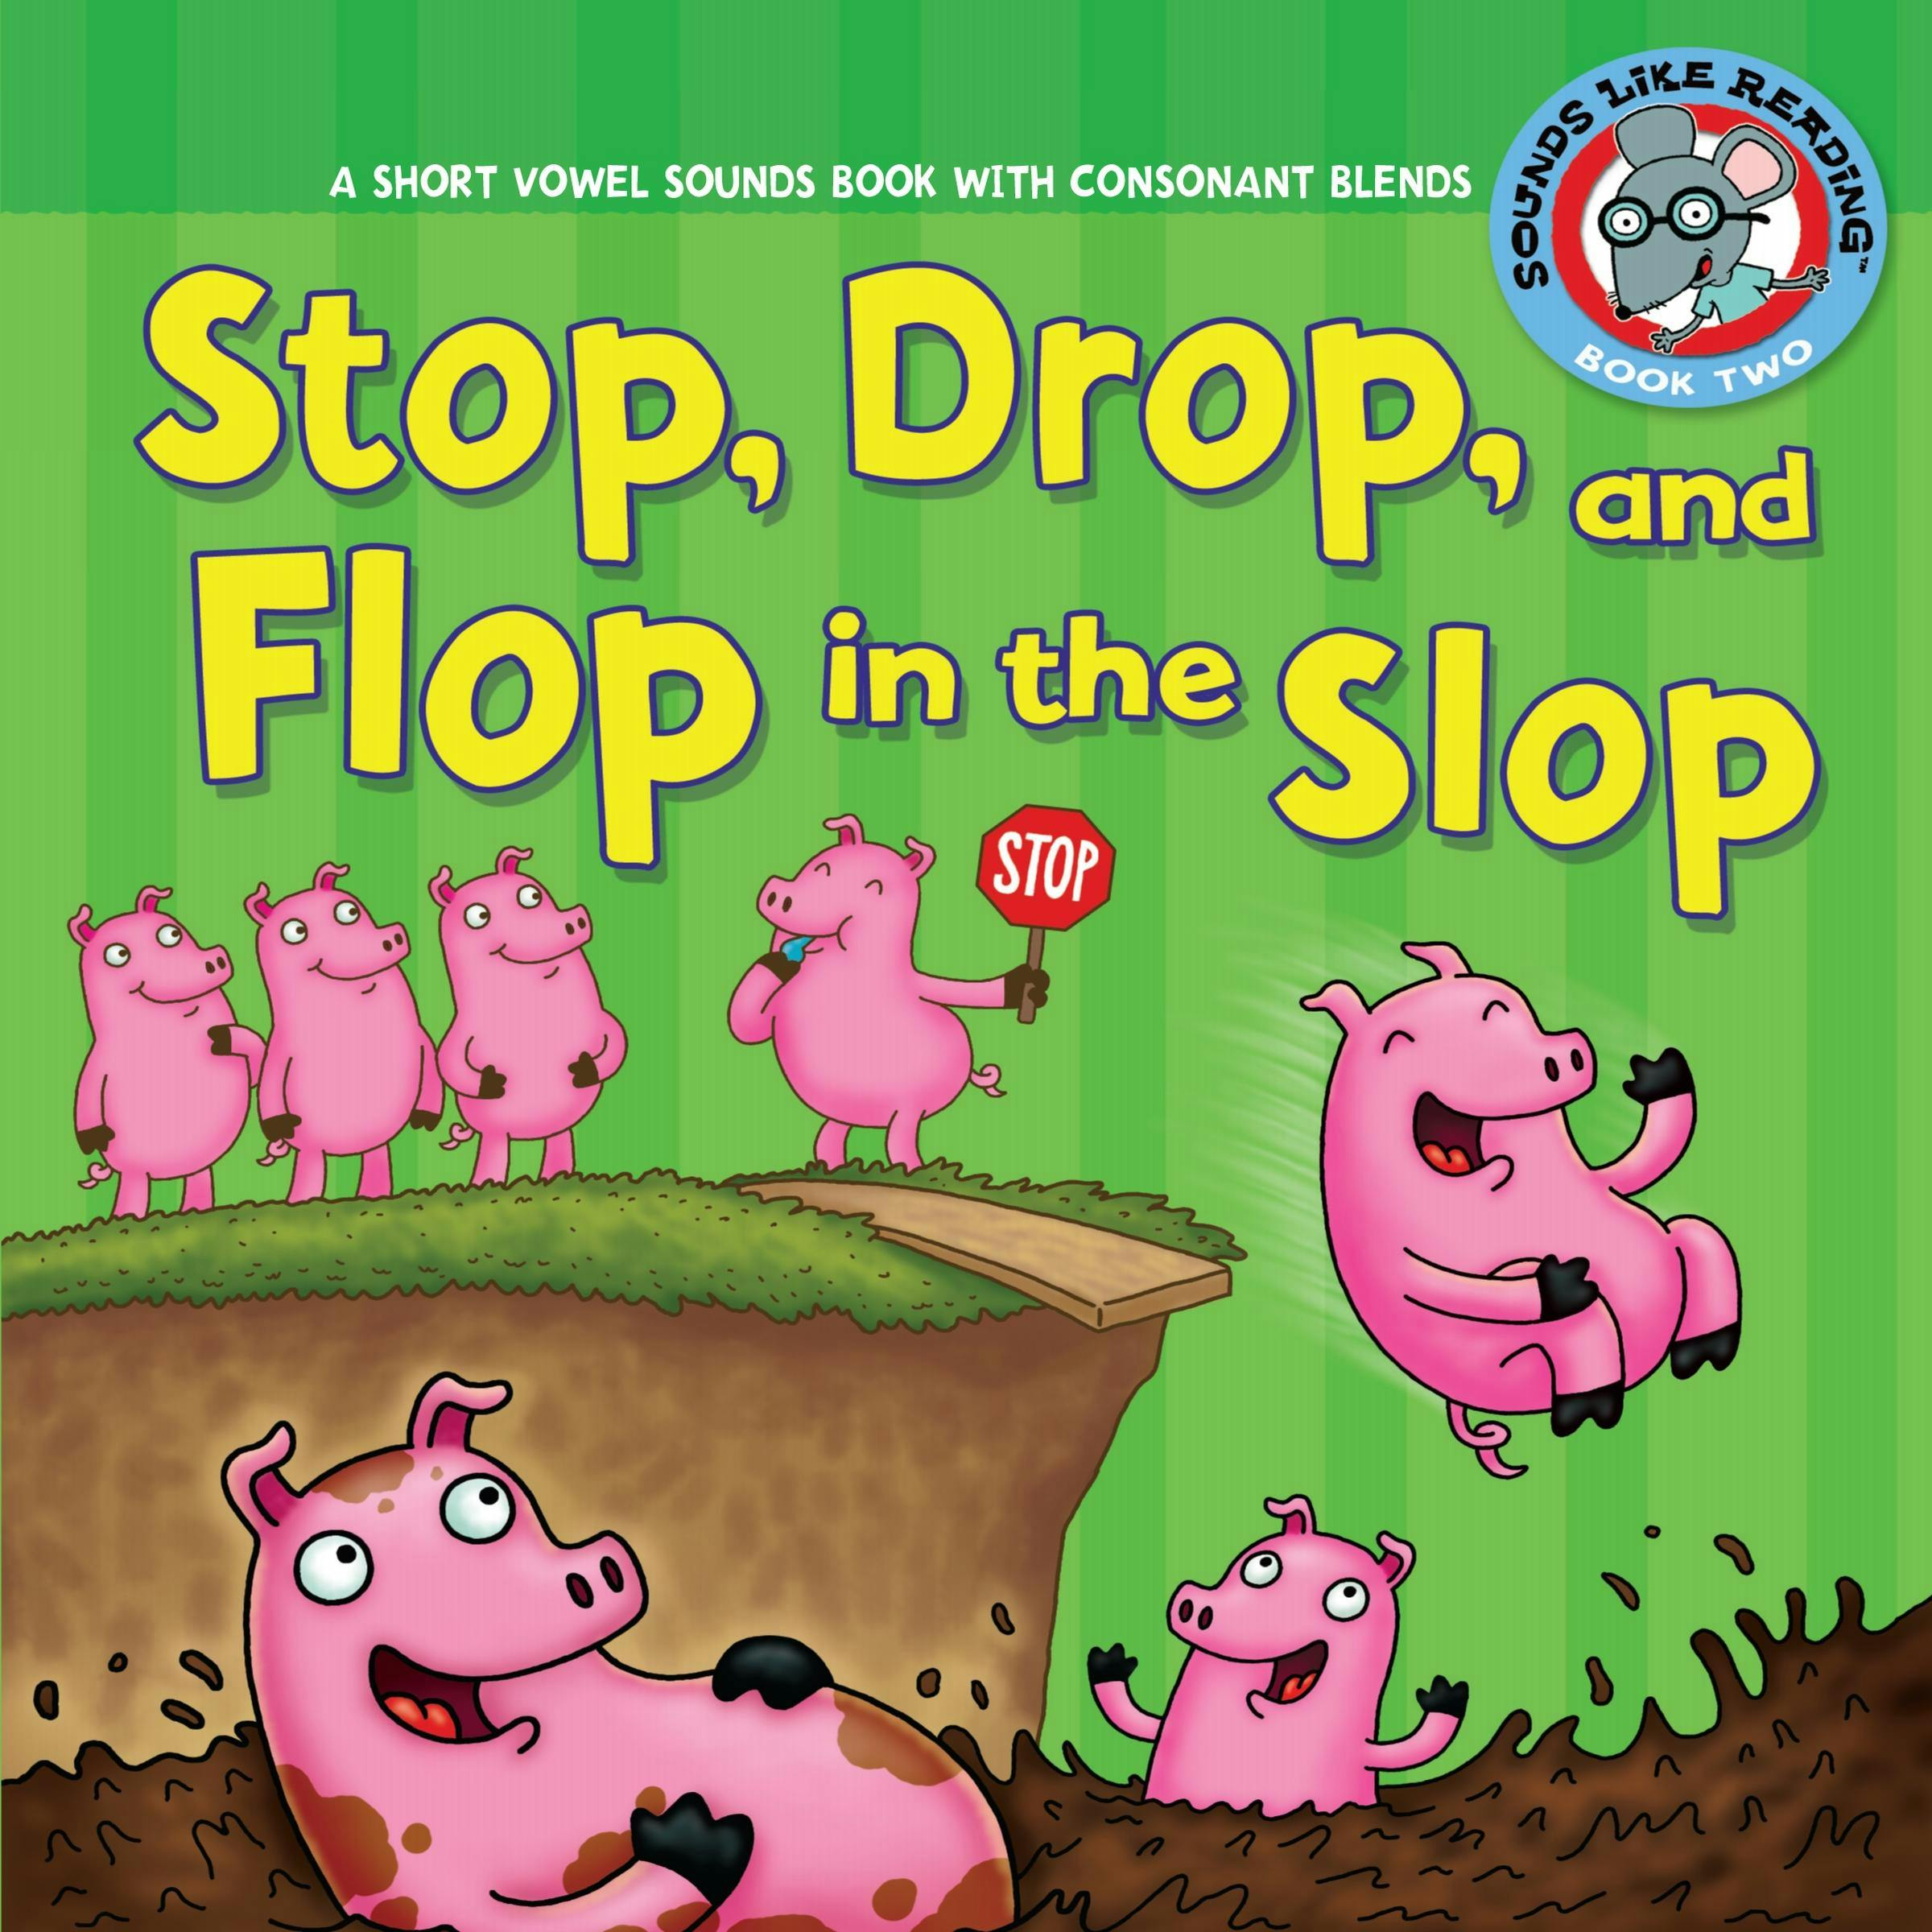 Stop, Drop, and Flop in the Slop: A Short Vowel Sounds Book with Consonant Blends - Jason Miskimins, Brian P. Cleary